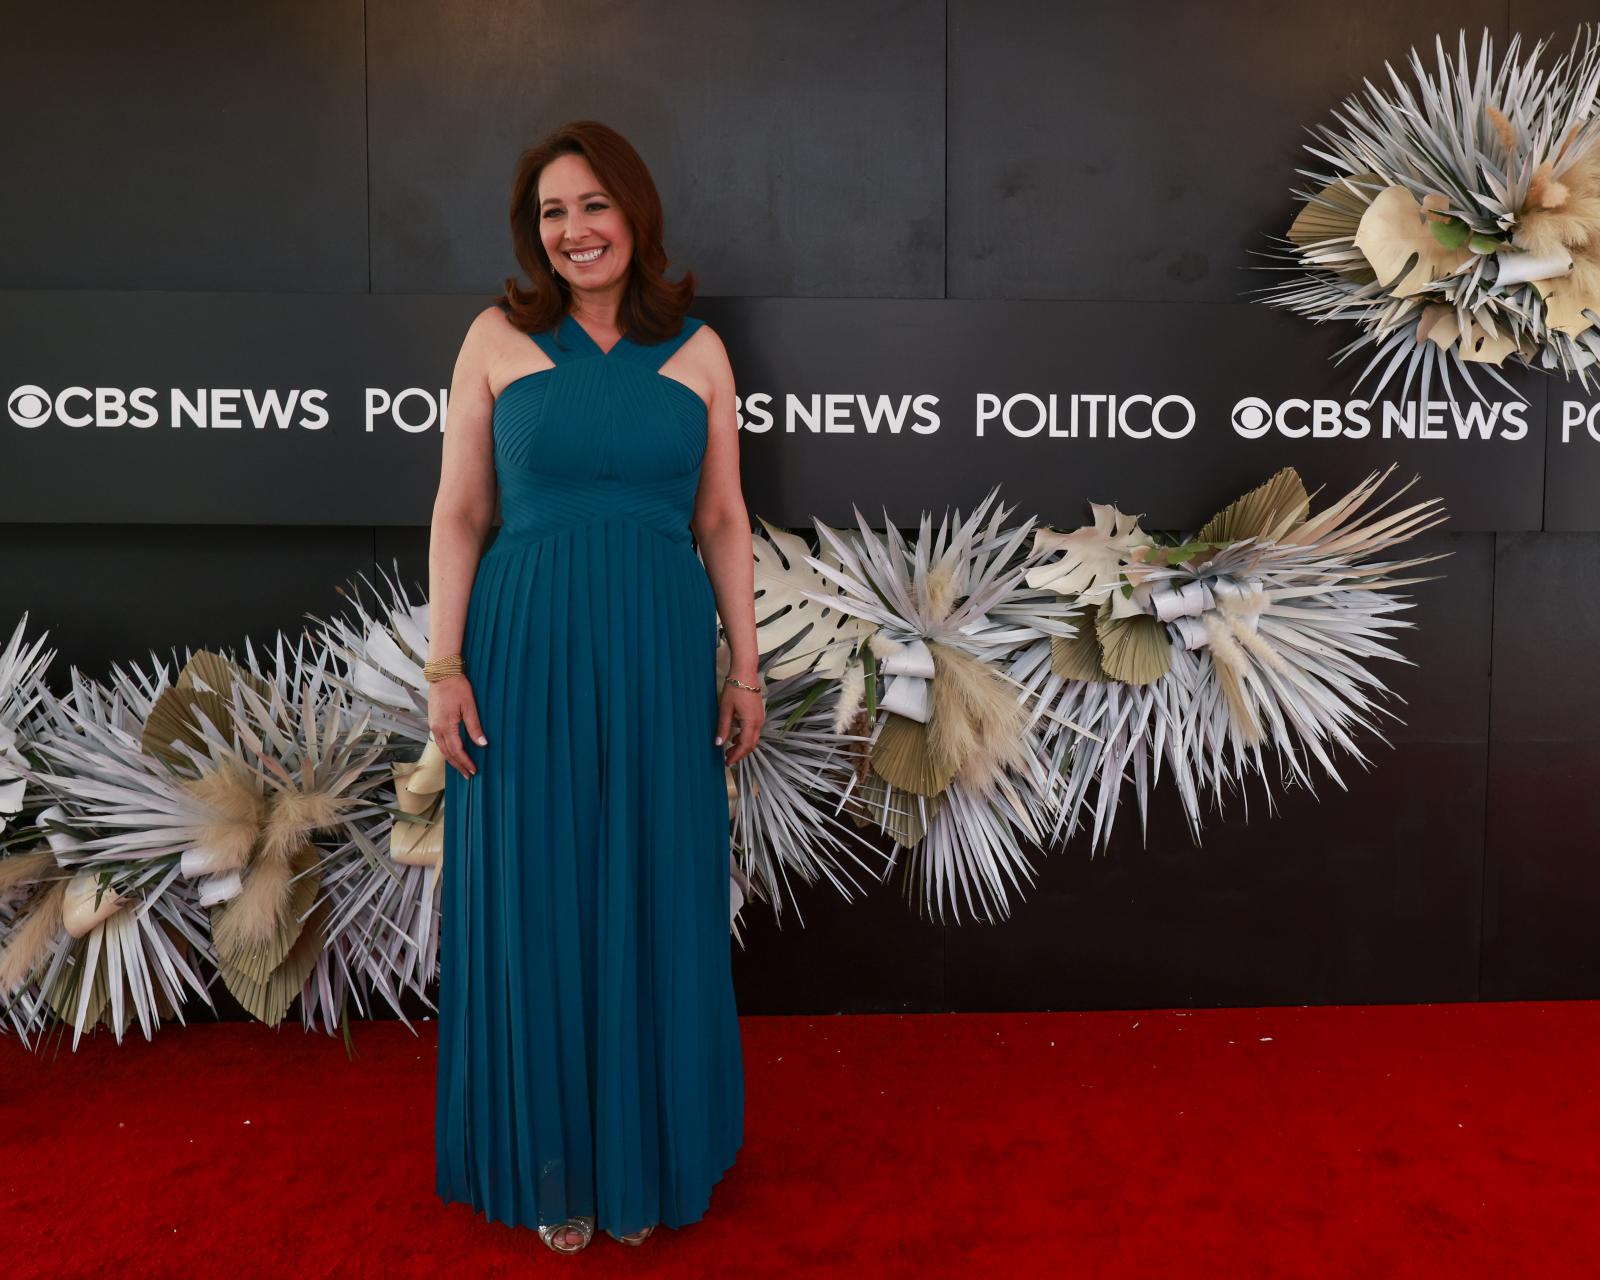 Image from Events - Nancy Cordes at the CBS News/POLITICO reception ahead of...